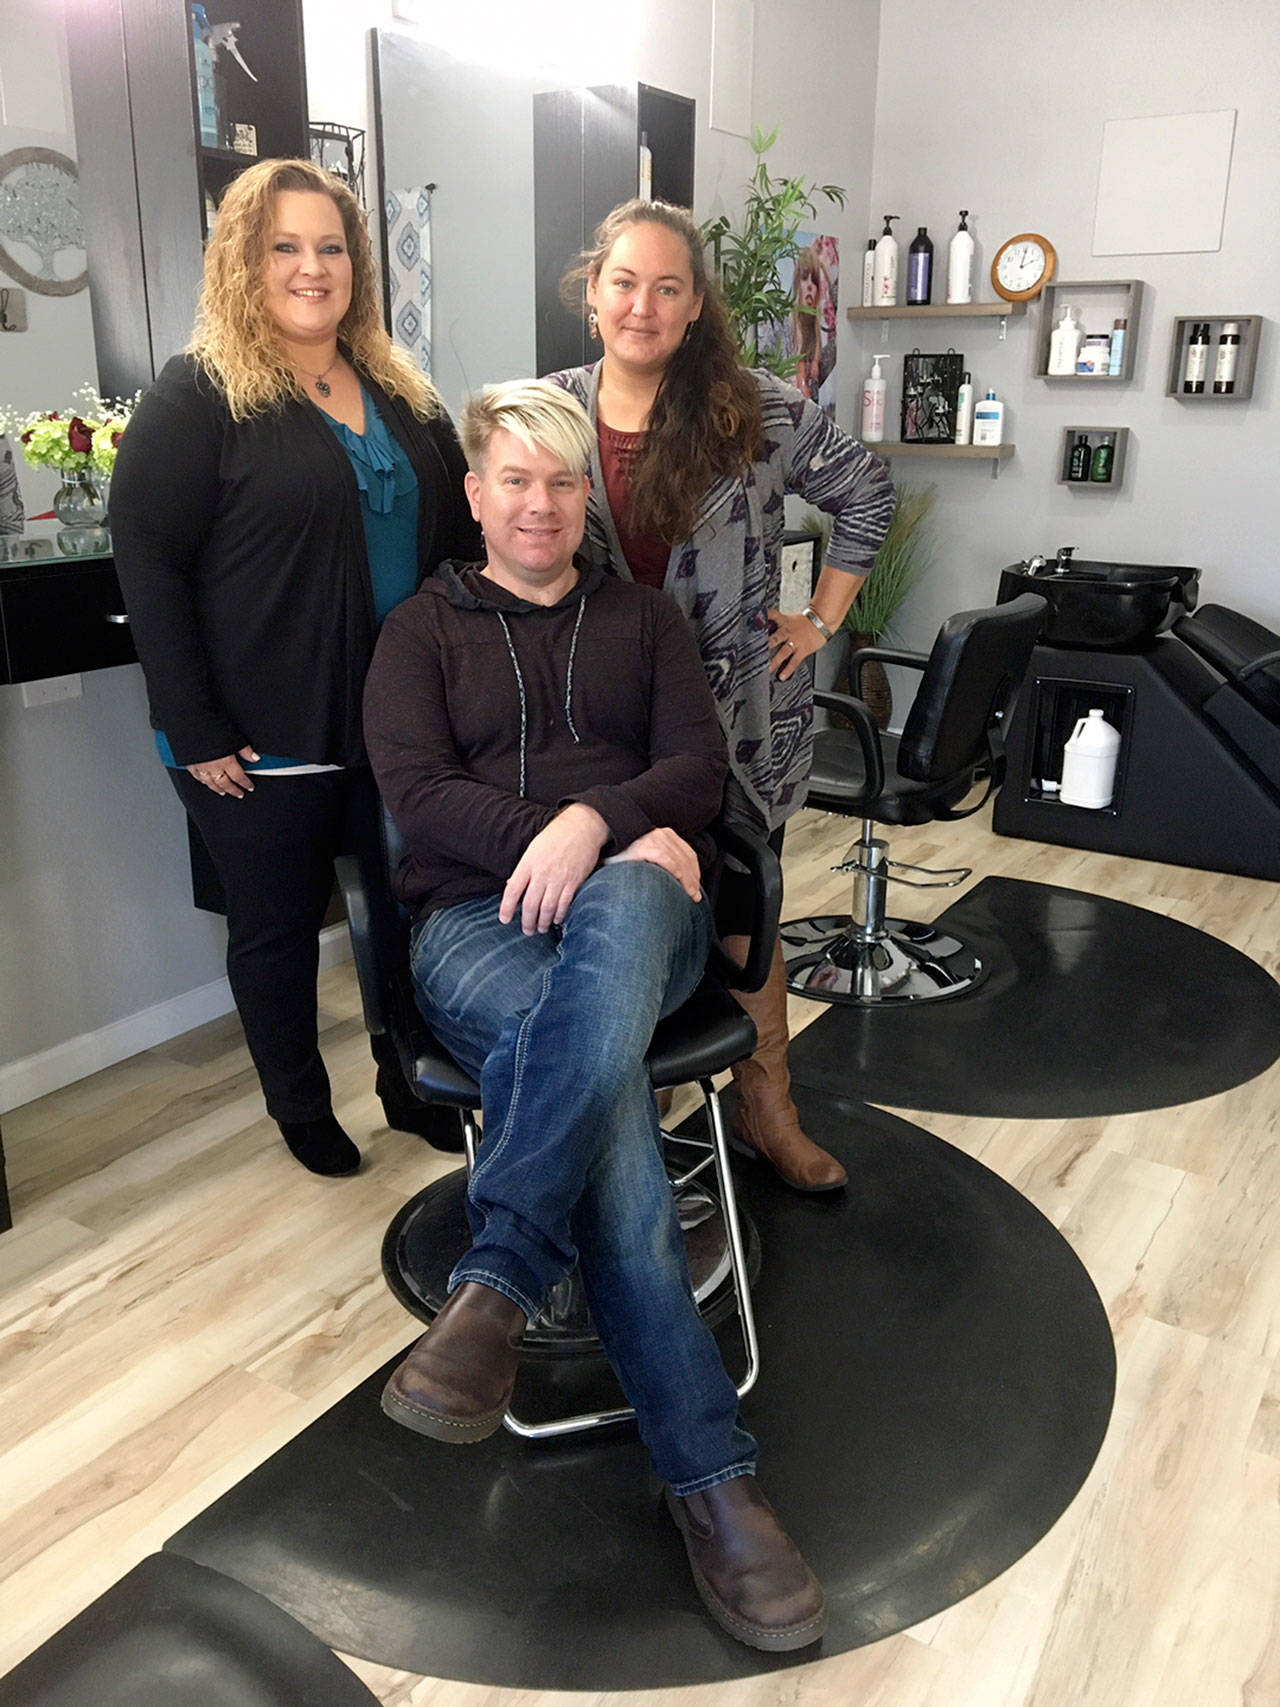 Members of the team at Amazing Chanes Hair Studio are, standing on left, cosmetologist and braider Tina Tangedahl; on right, nail technician Jennifer Hedin; and, seated, studio owner Kyle Ellis. (Vivian Elvis Hansen/Peninsula Daily News)